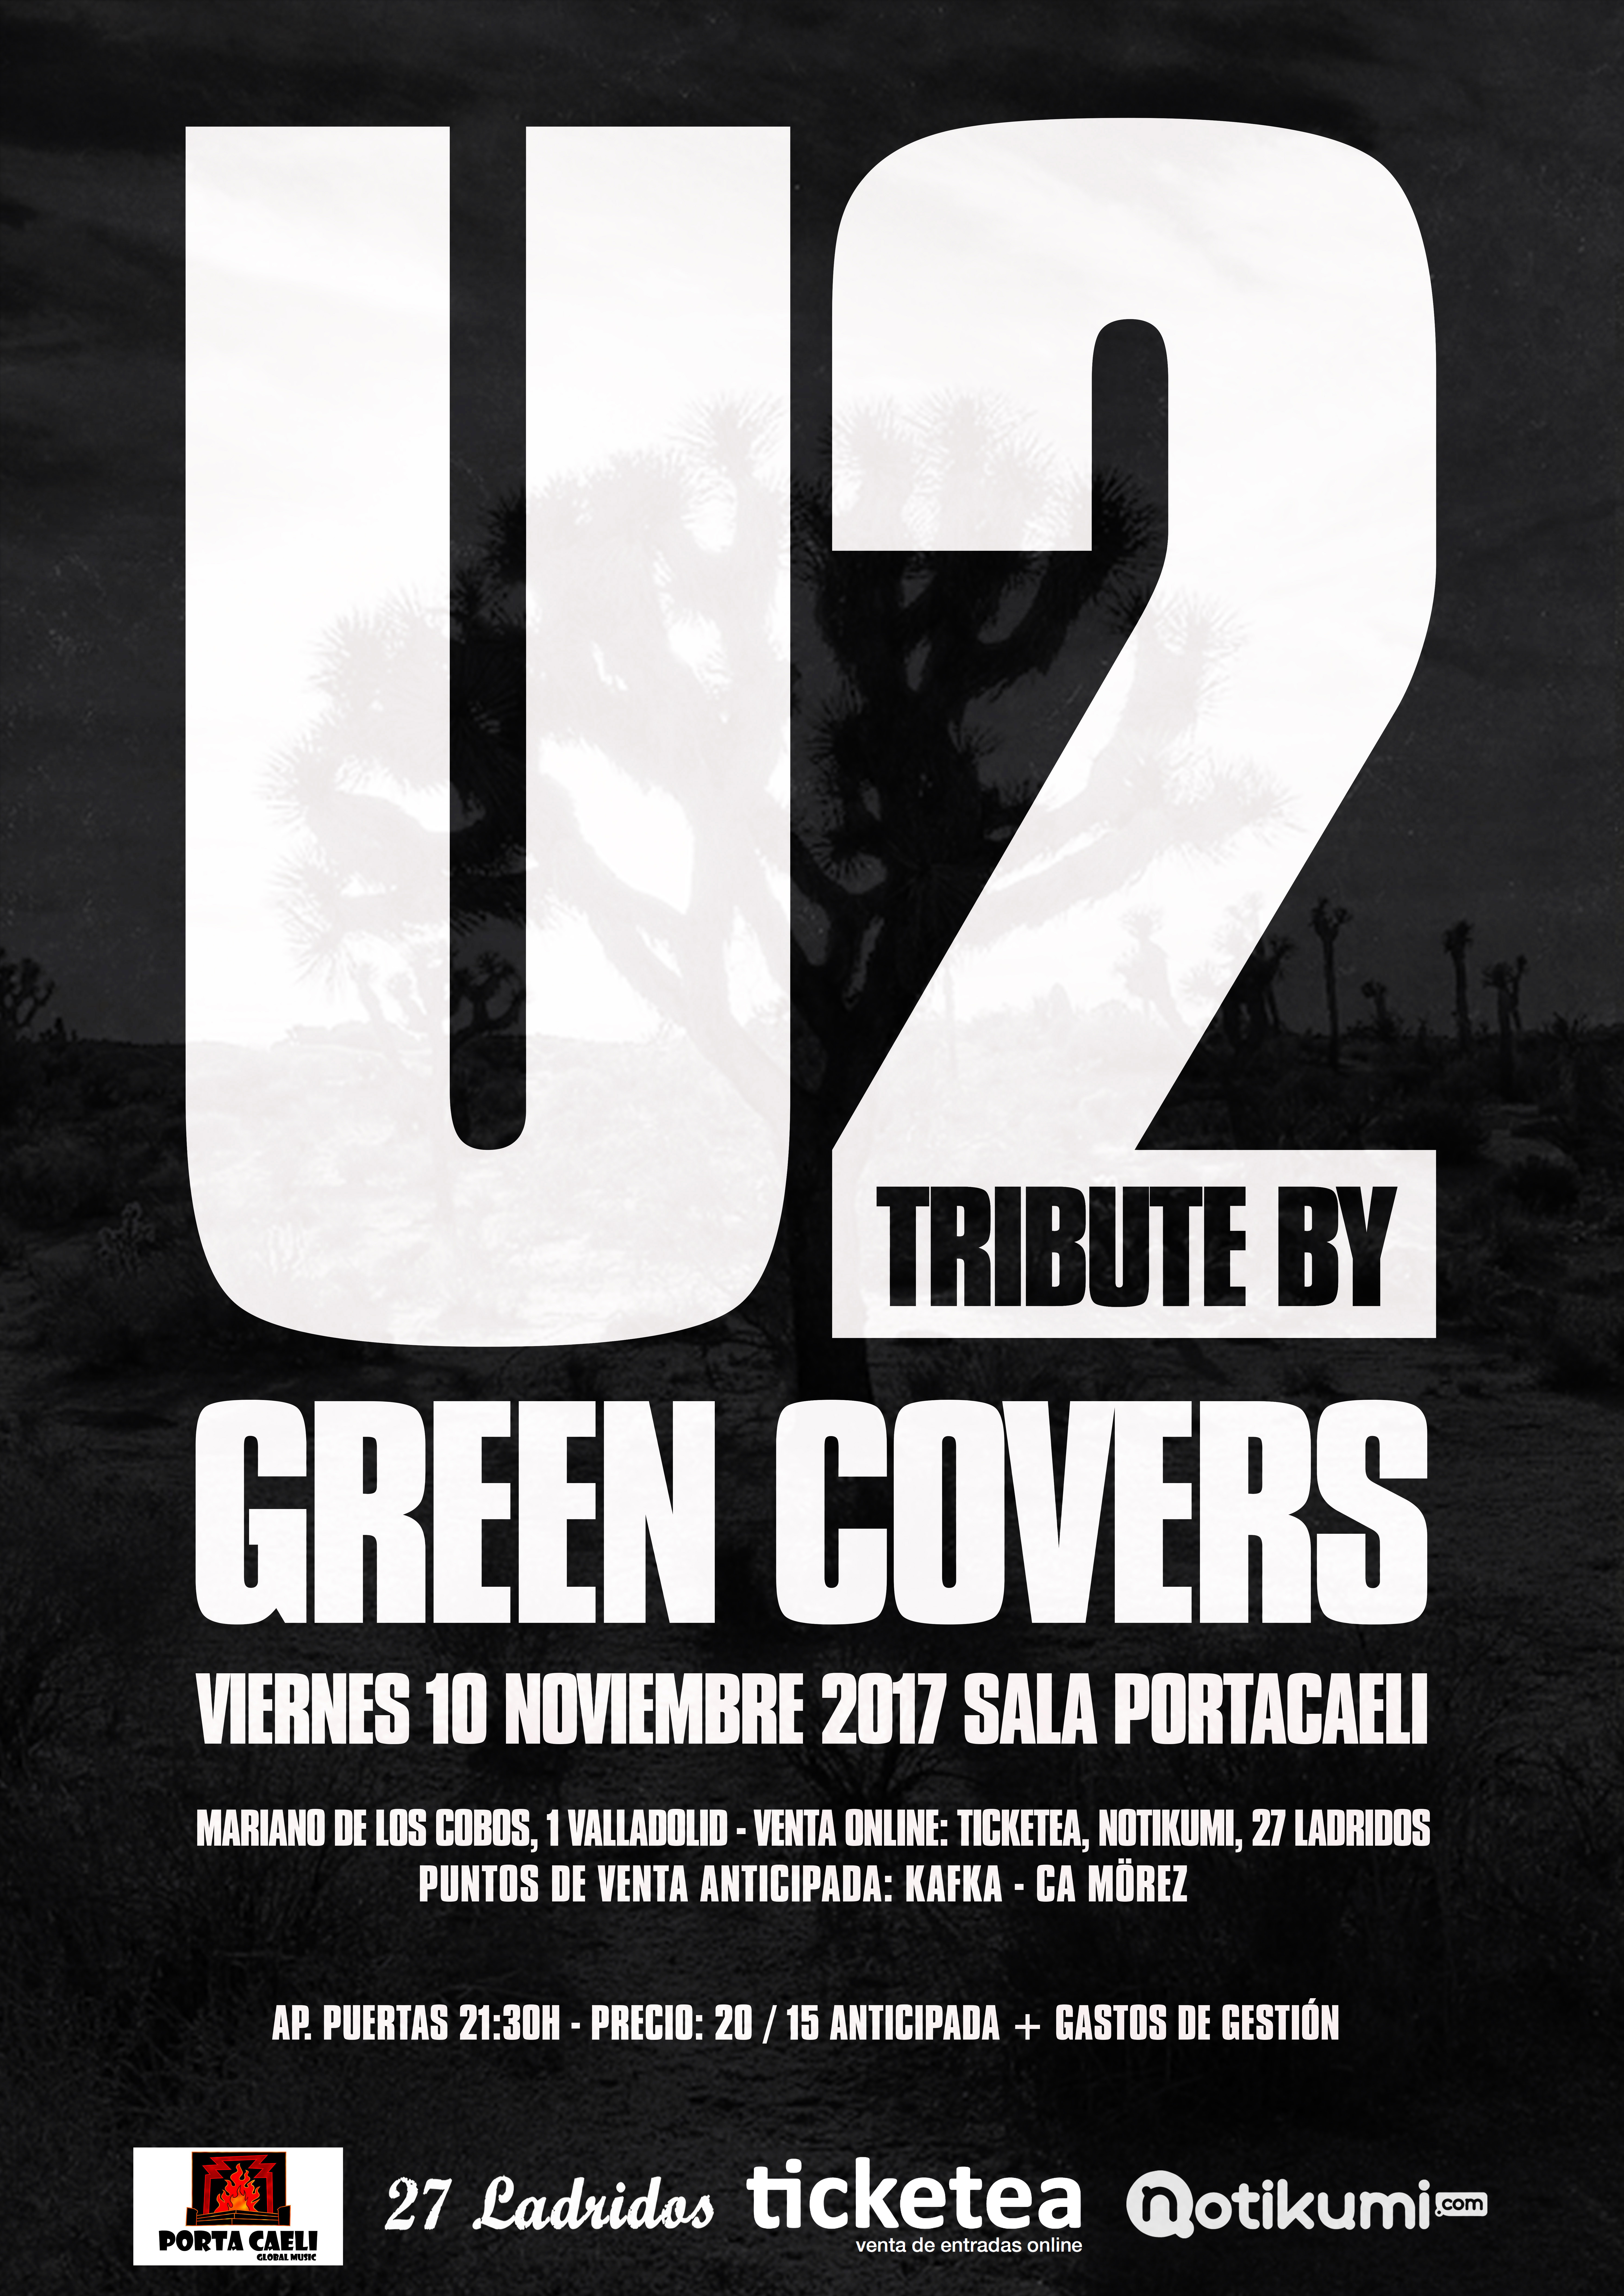 u2 tribute green covers valladolid